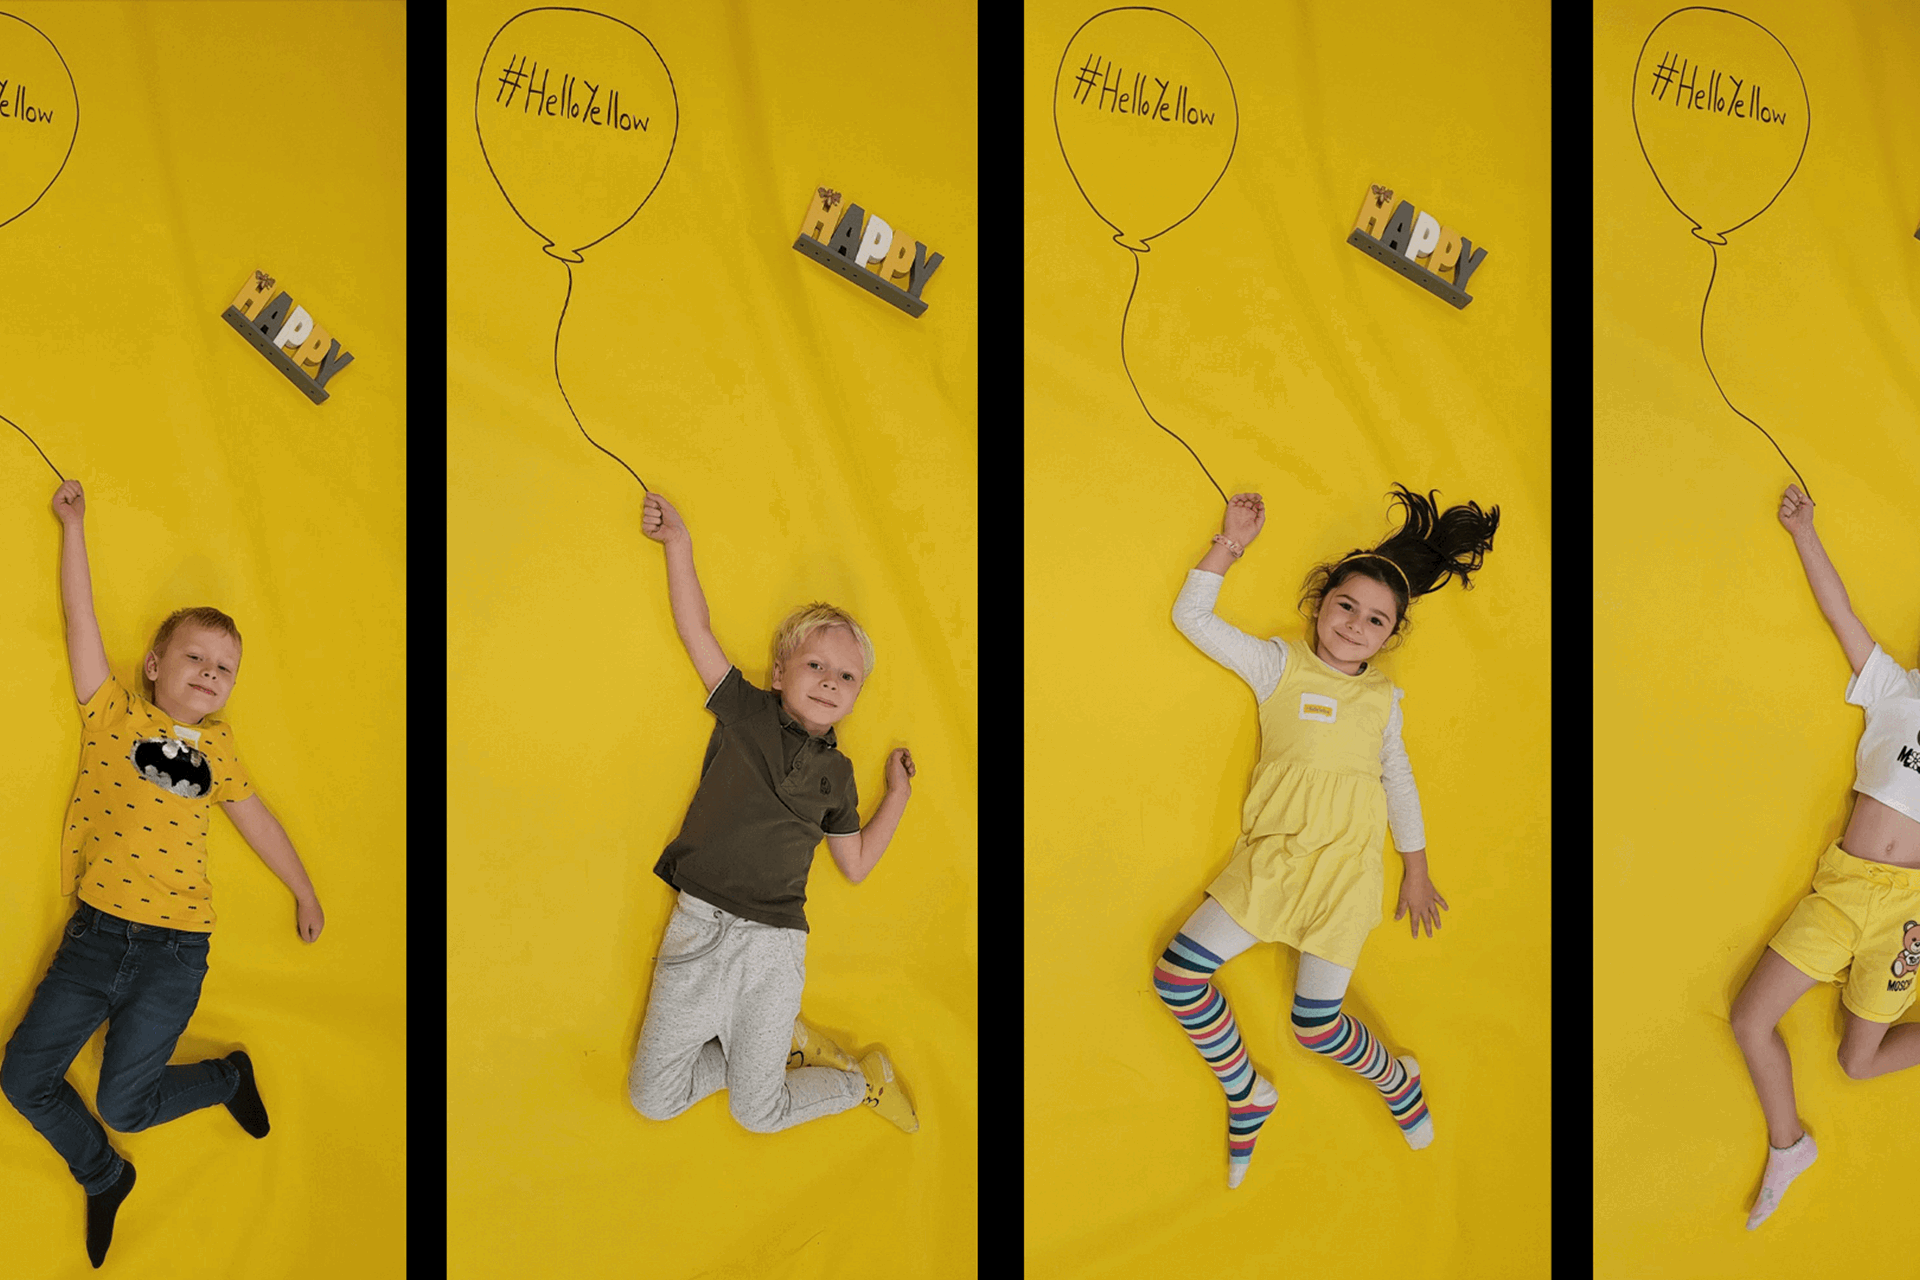 Four young people lie on the floor on a yellow background pretending to hold a balloon which says #HelloYellow, they all wear yellow clothing.